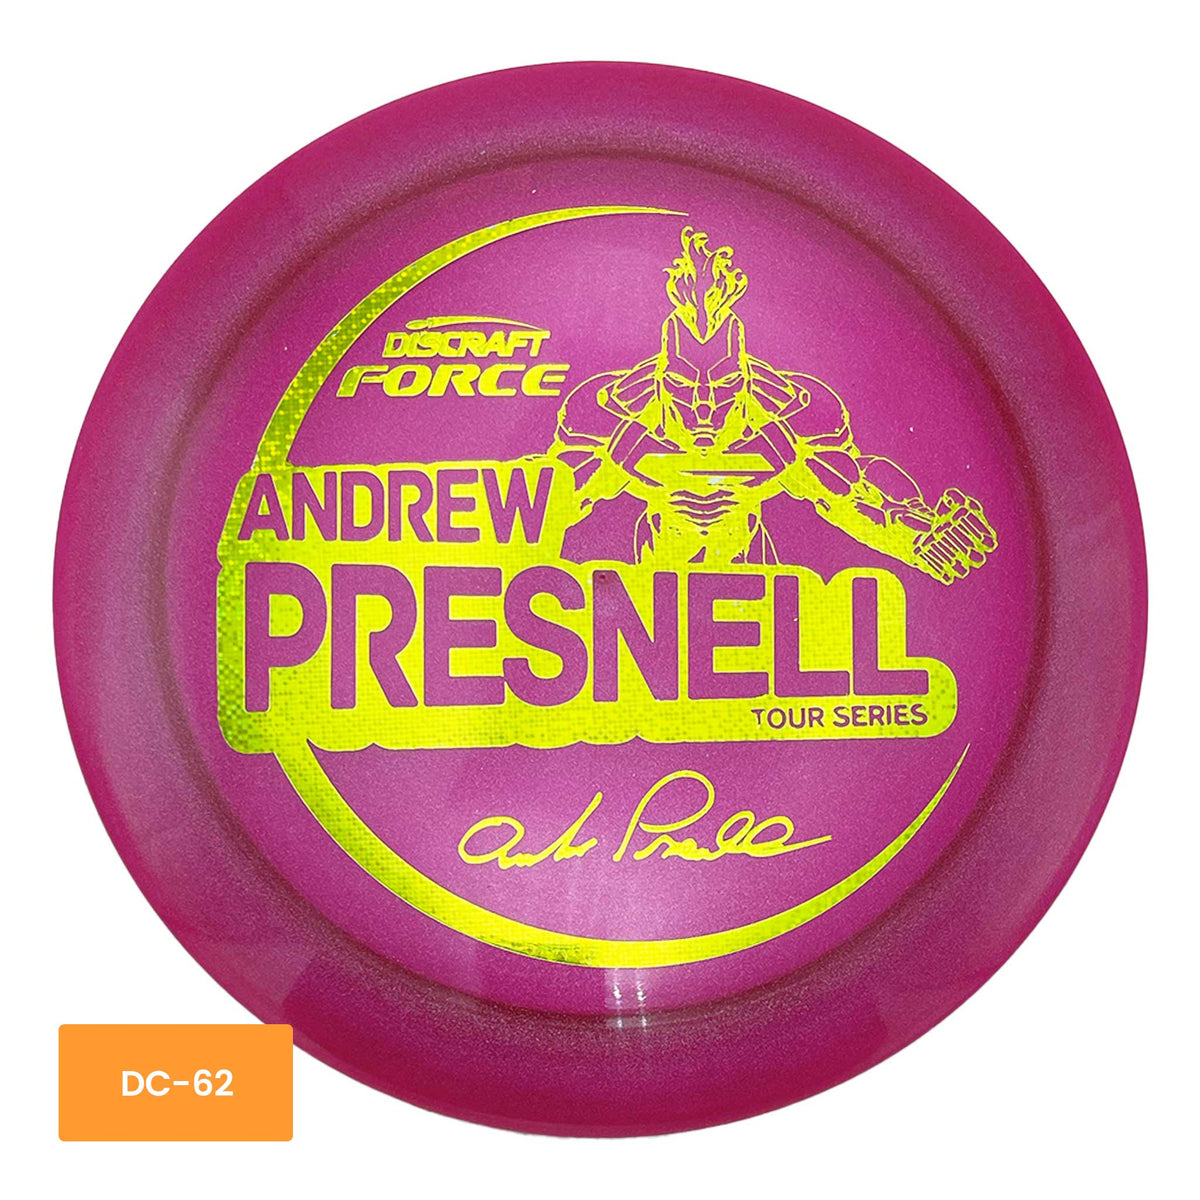 Discraft 2021 Andrew Presnell Tour Series Force distance driver - Pink/Gold